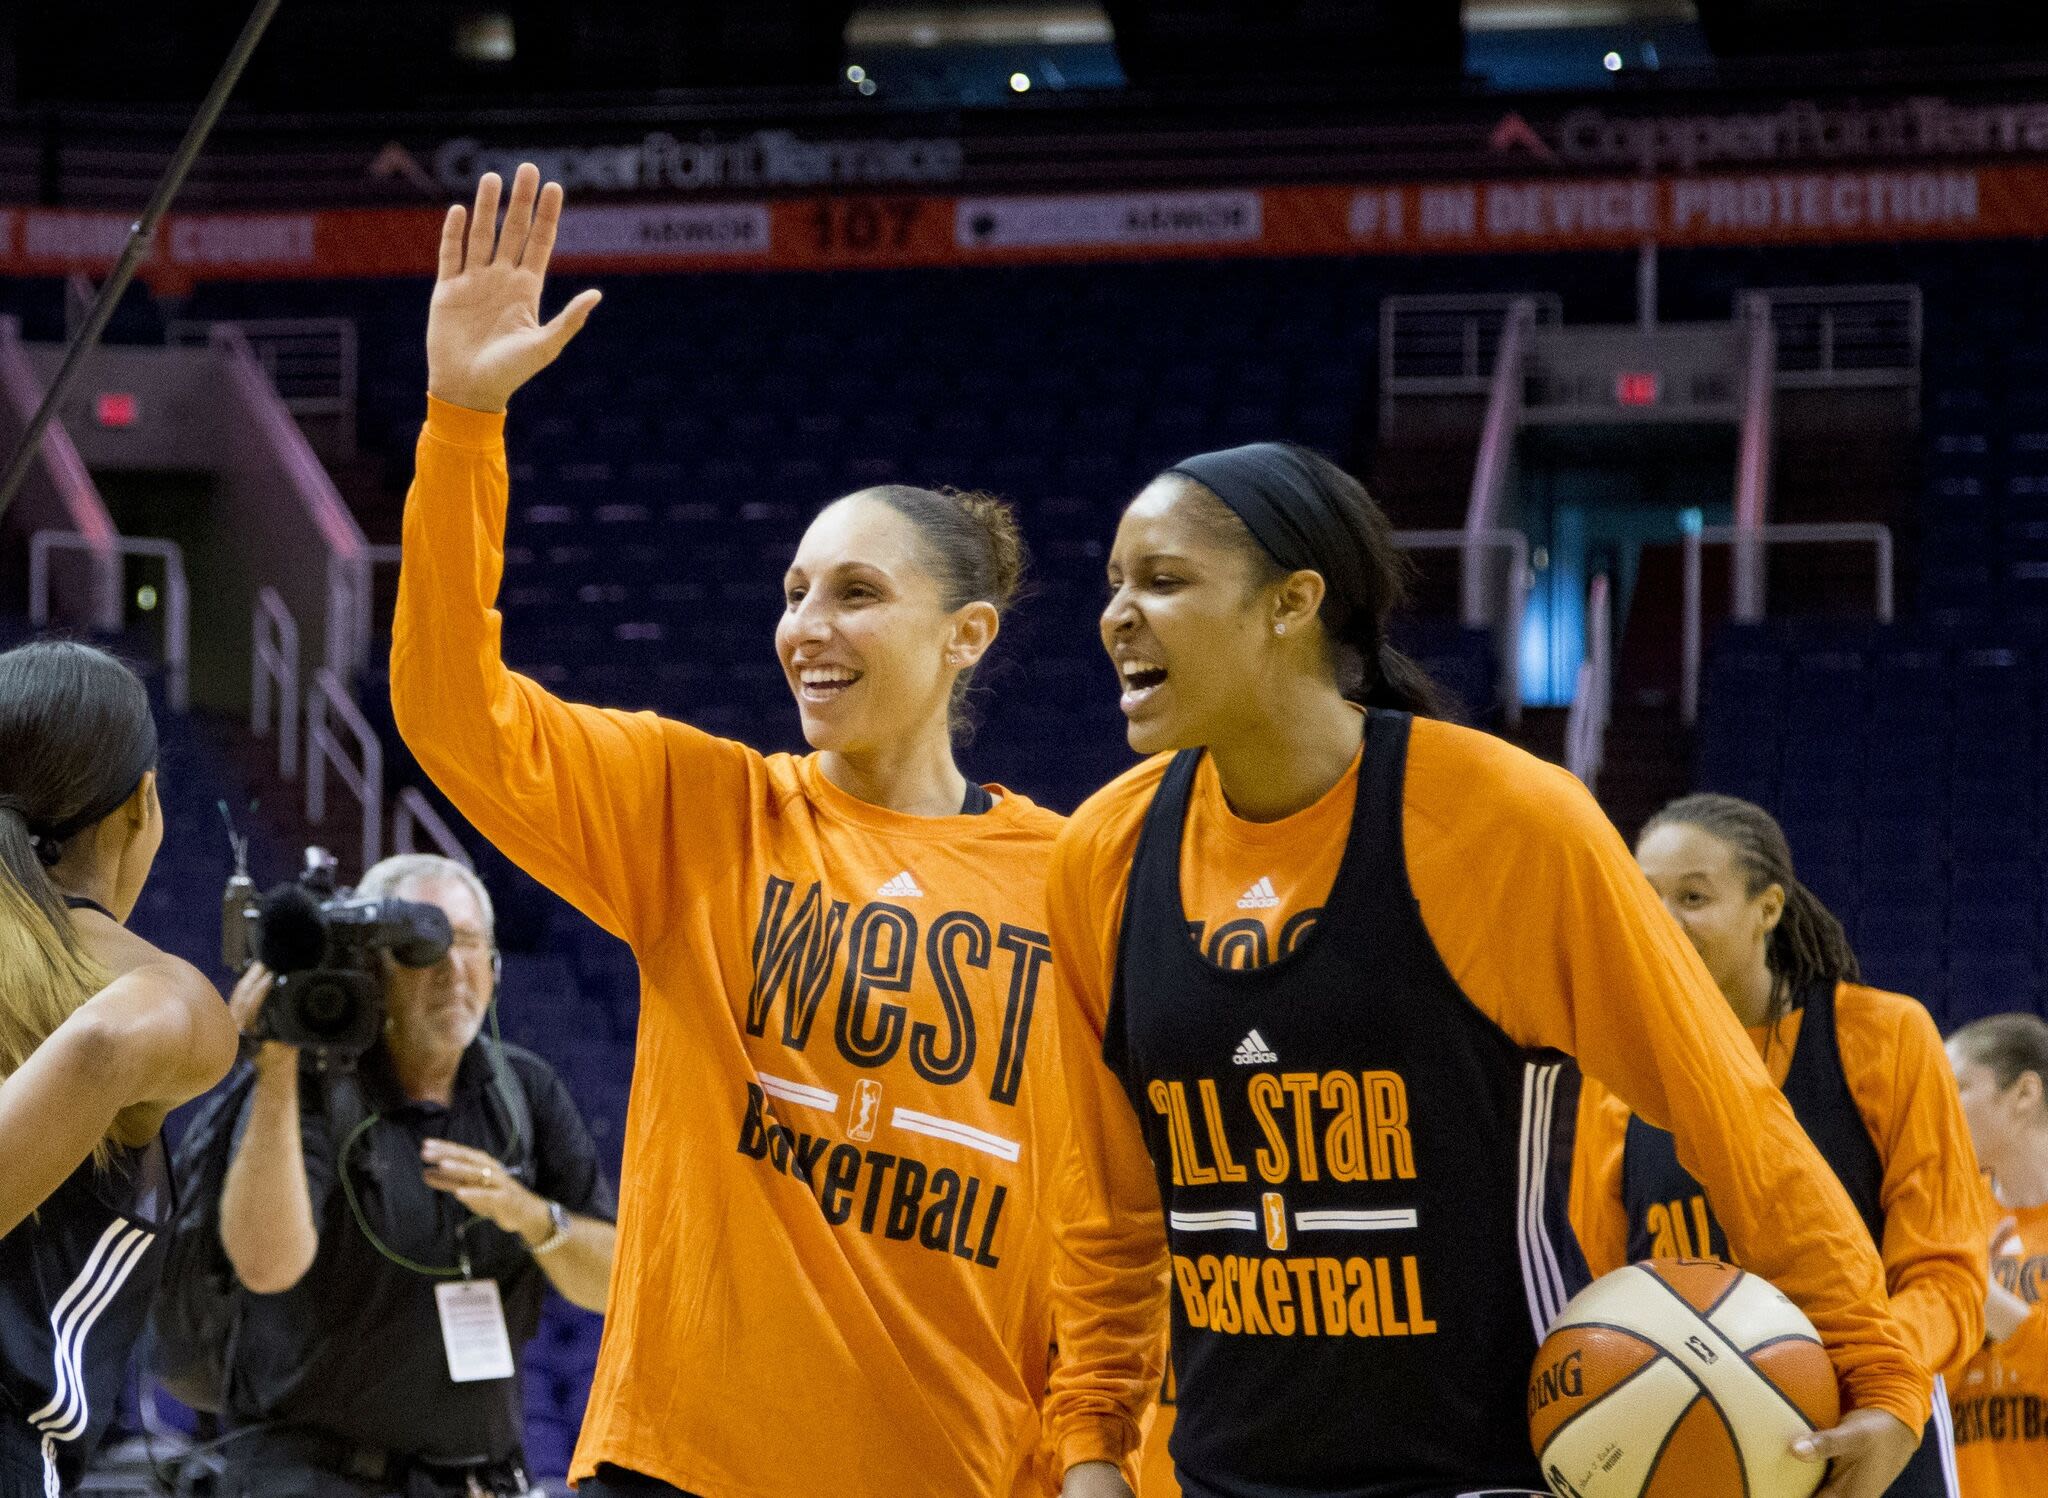 UConn greats Diana Taurasi, Maya Moore named to ESPN list of Top 100 professional athletes since 2000